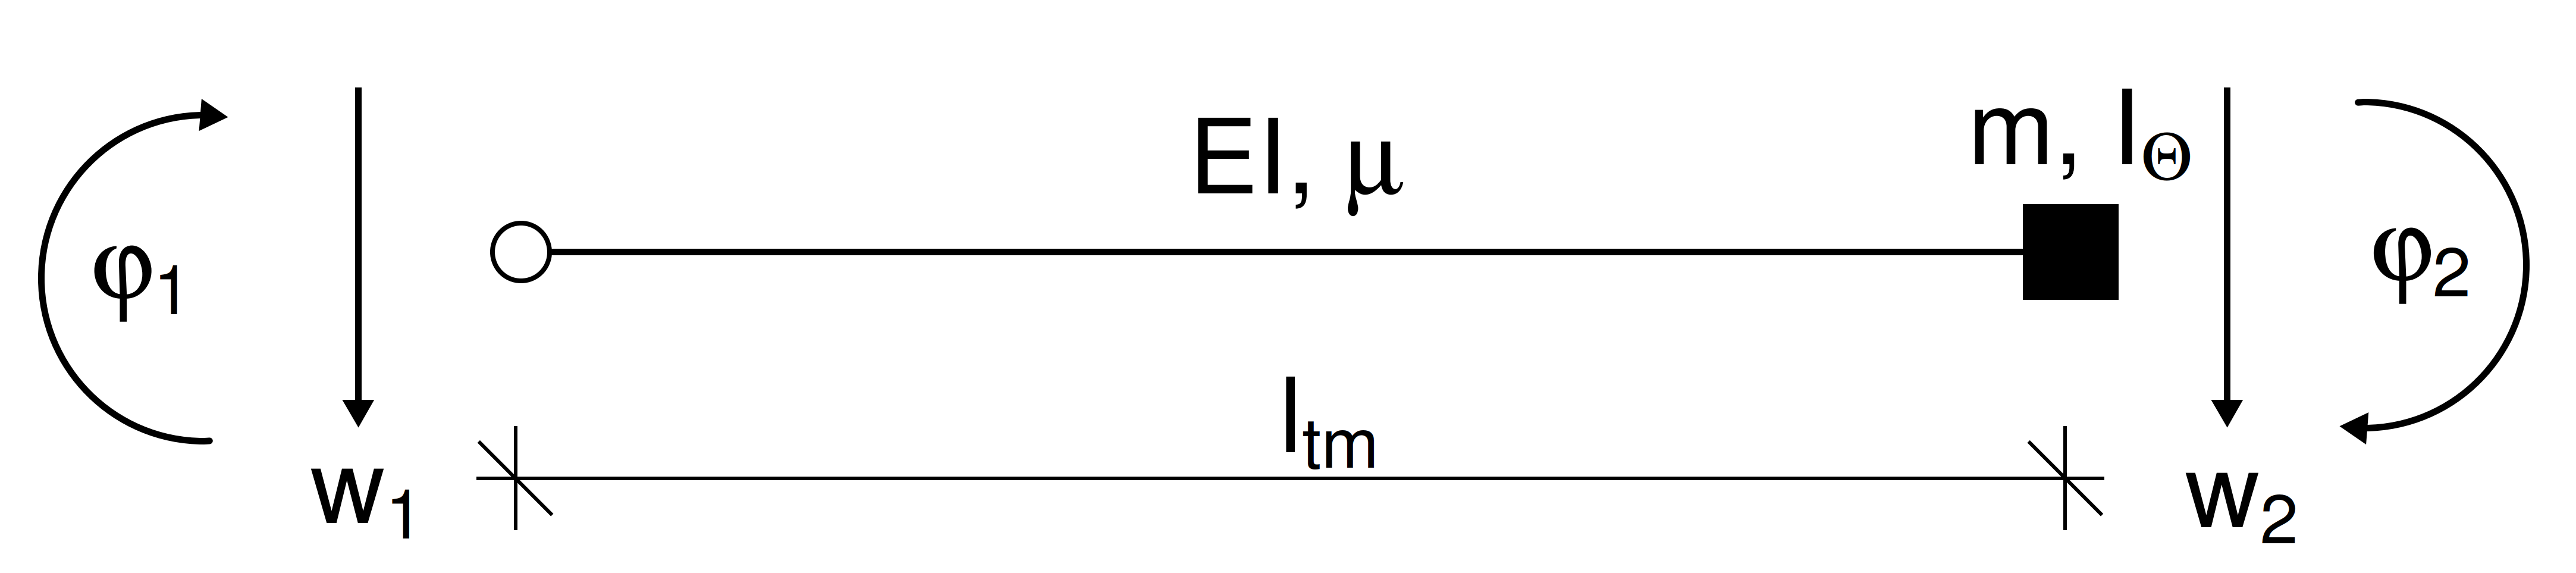 The FE-element of the tip mass model